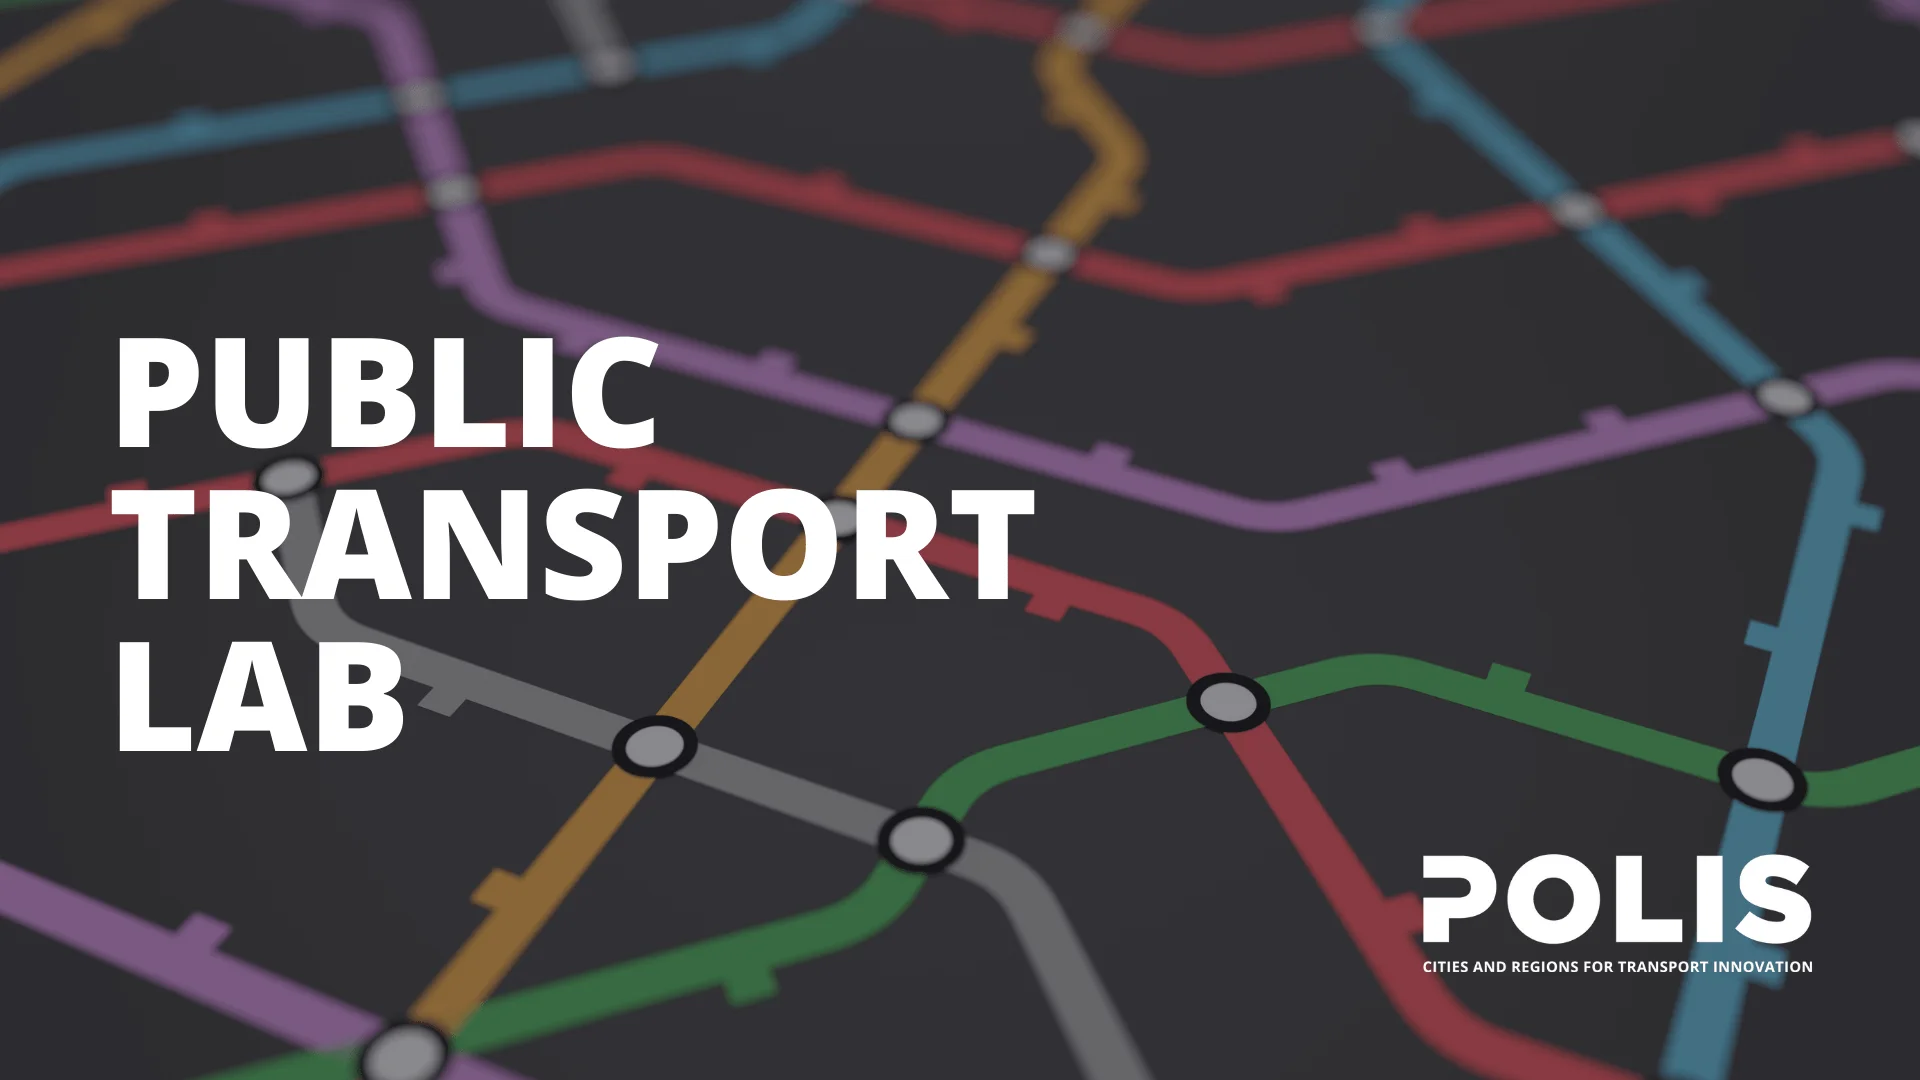 Public Transport Lab: Overcoming barriers, inclusiveness in public transport systems